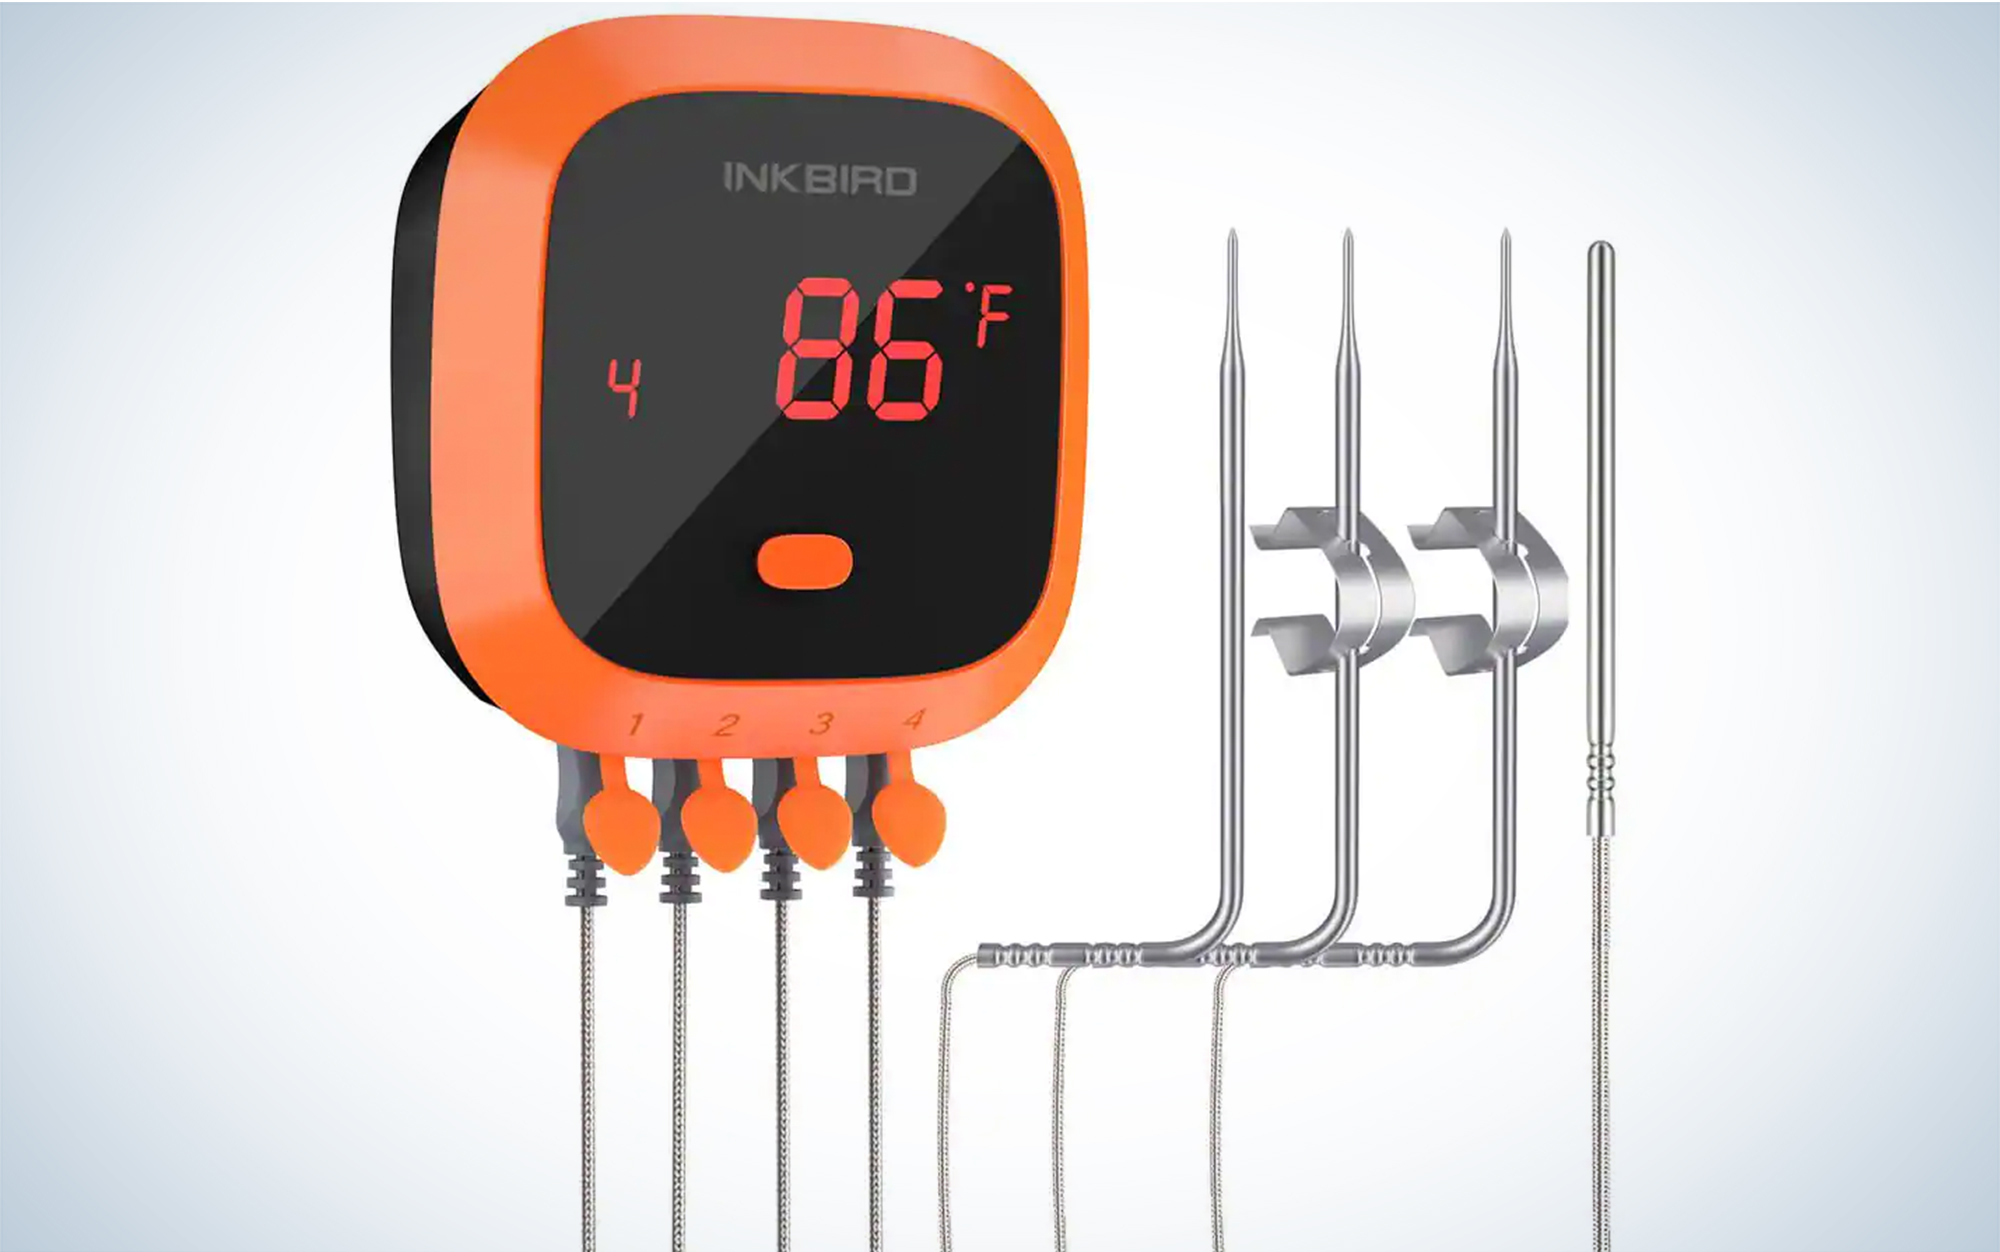 The Inkbird is one of the best wireless meat thermometers.